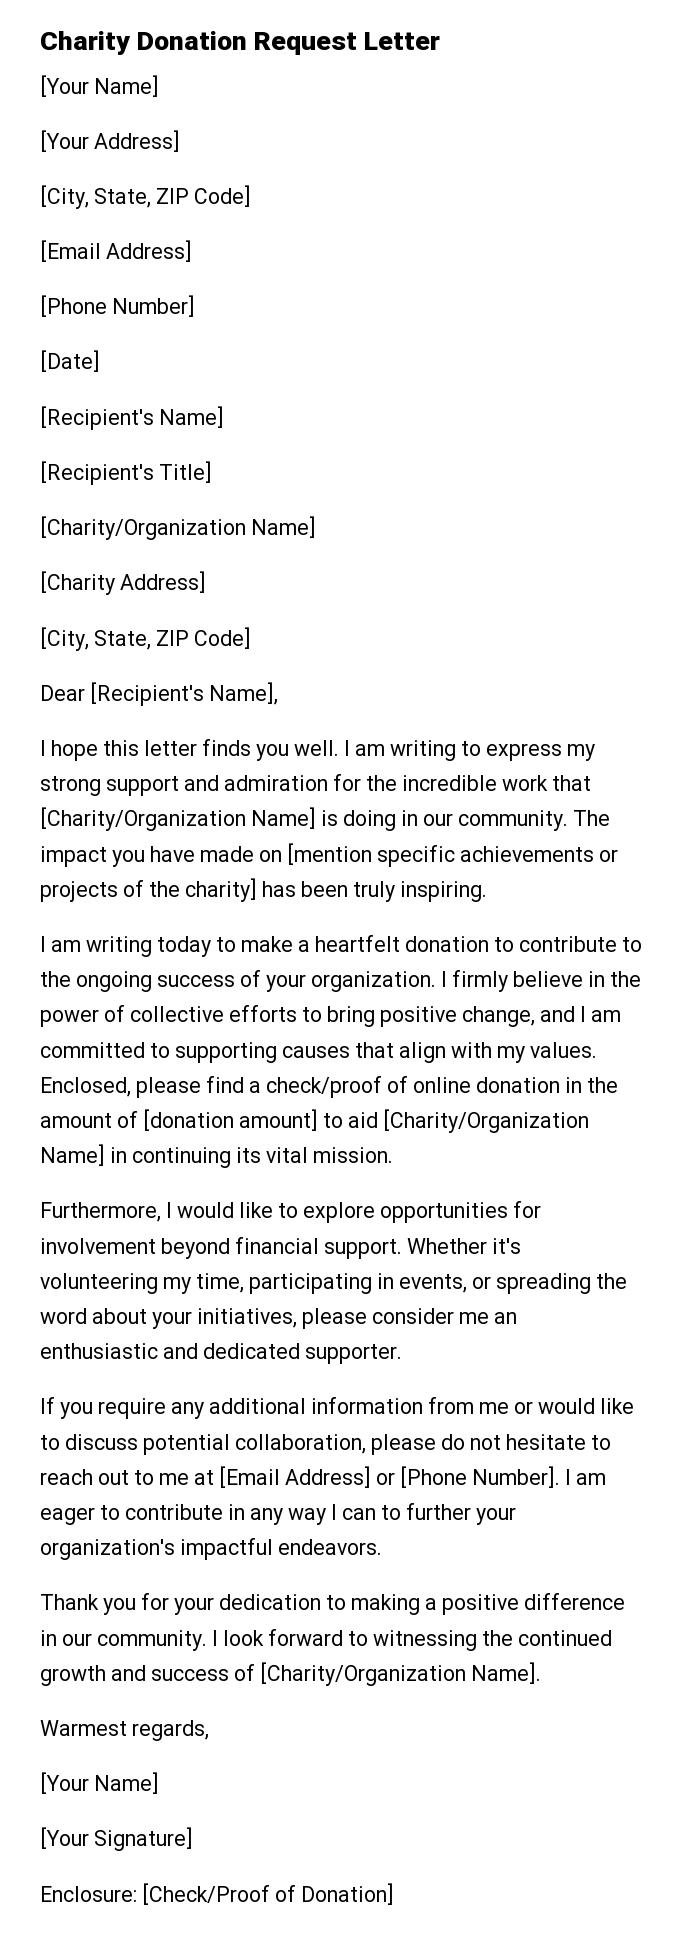 Charity Donation Request Letter